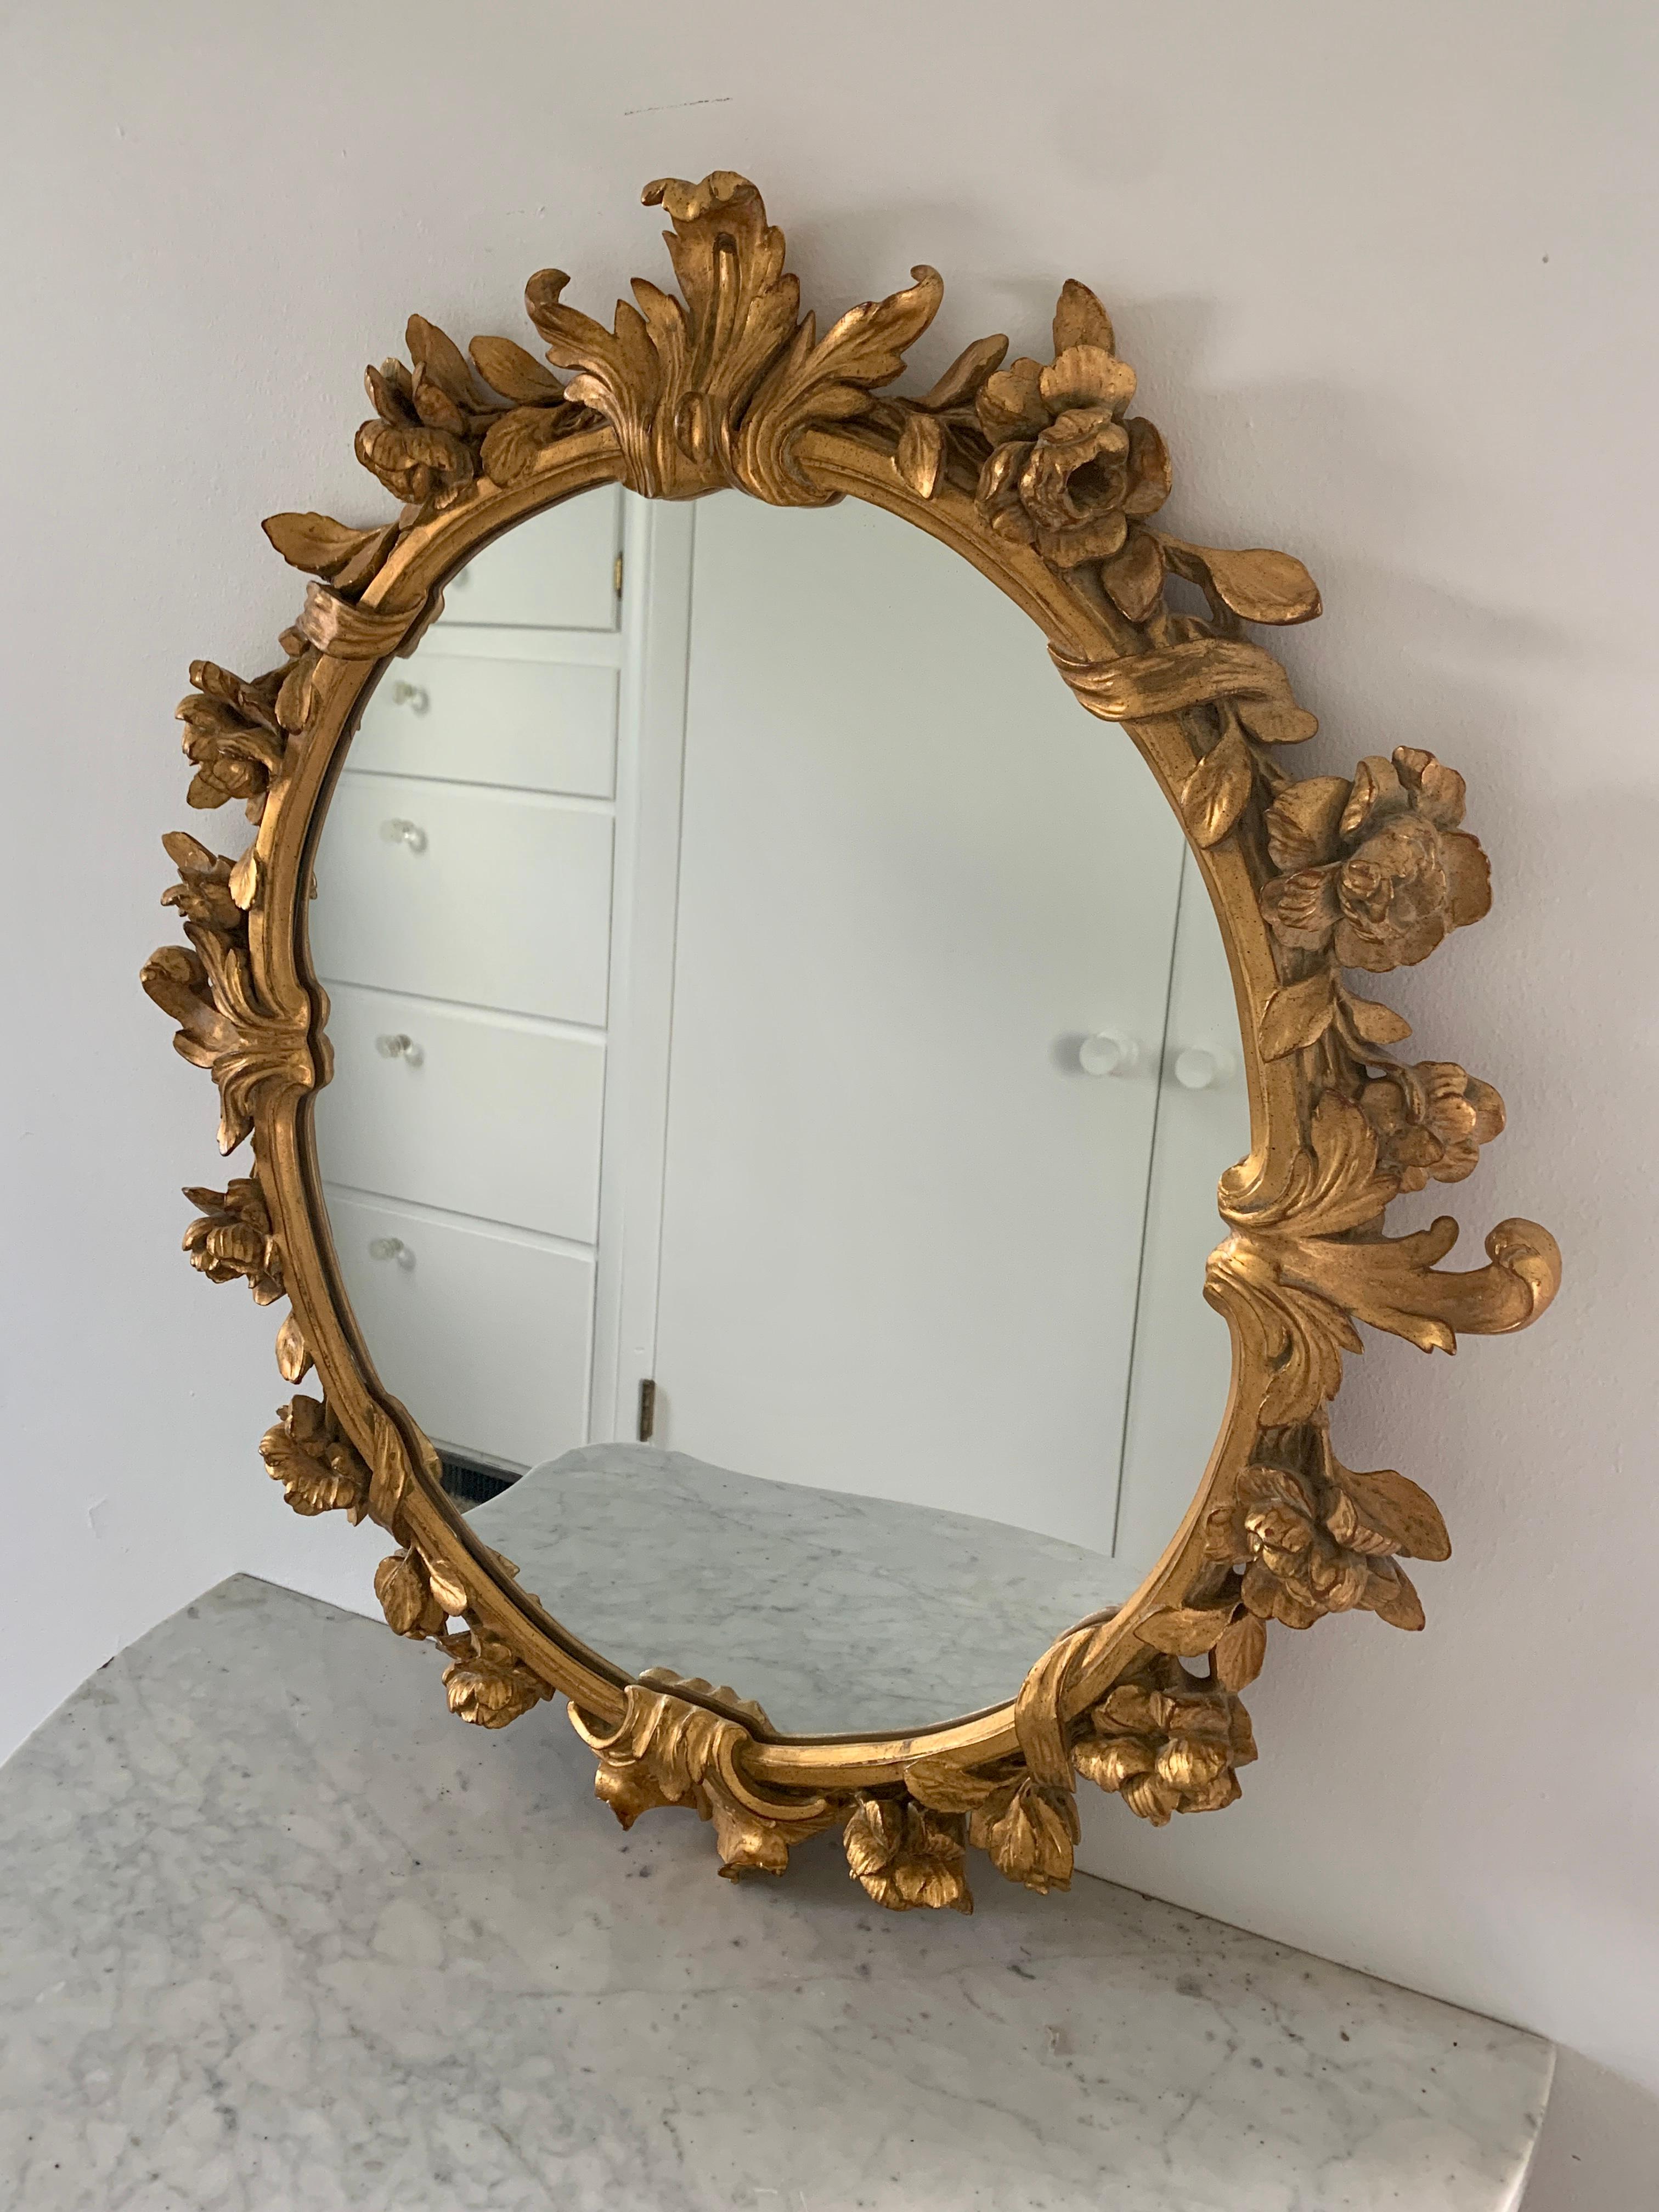 A stunning Rococo style wall mirror featuring foliate swags and carved roses

Italy, Late 20th century

Giltwood frame, with mirror glass

Measures: 26.25